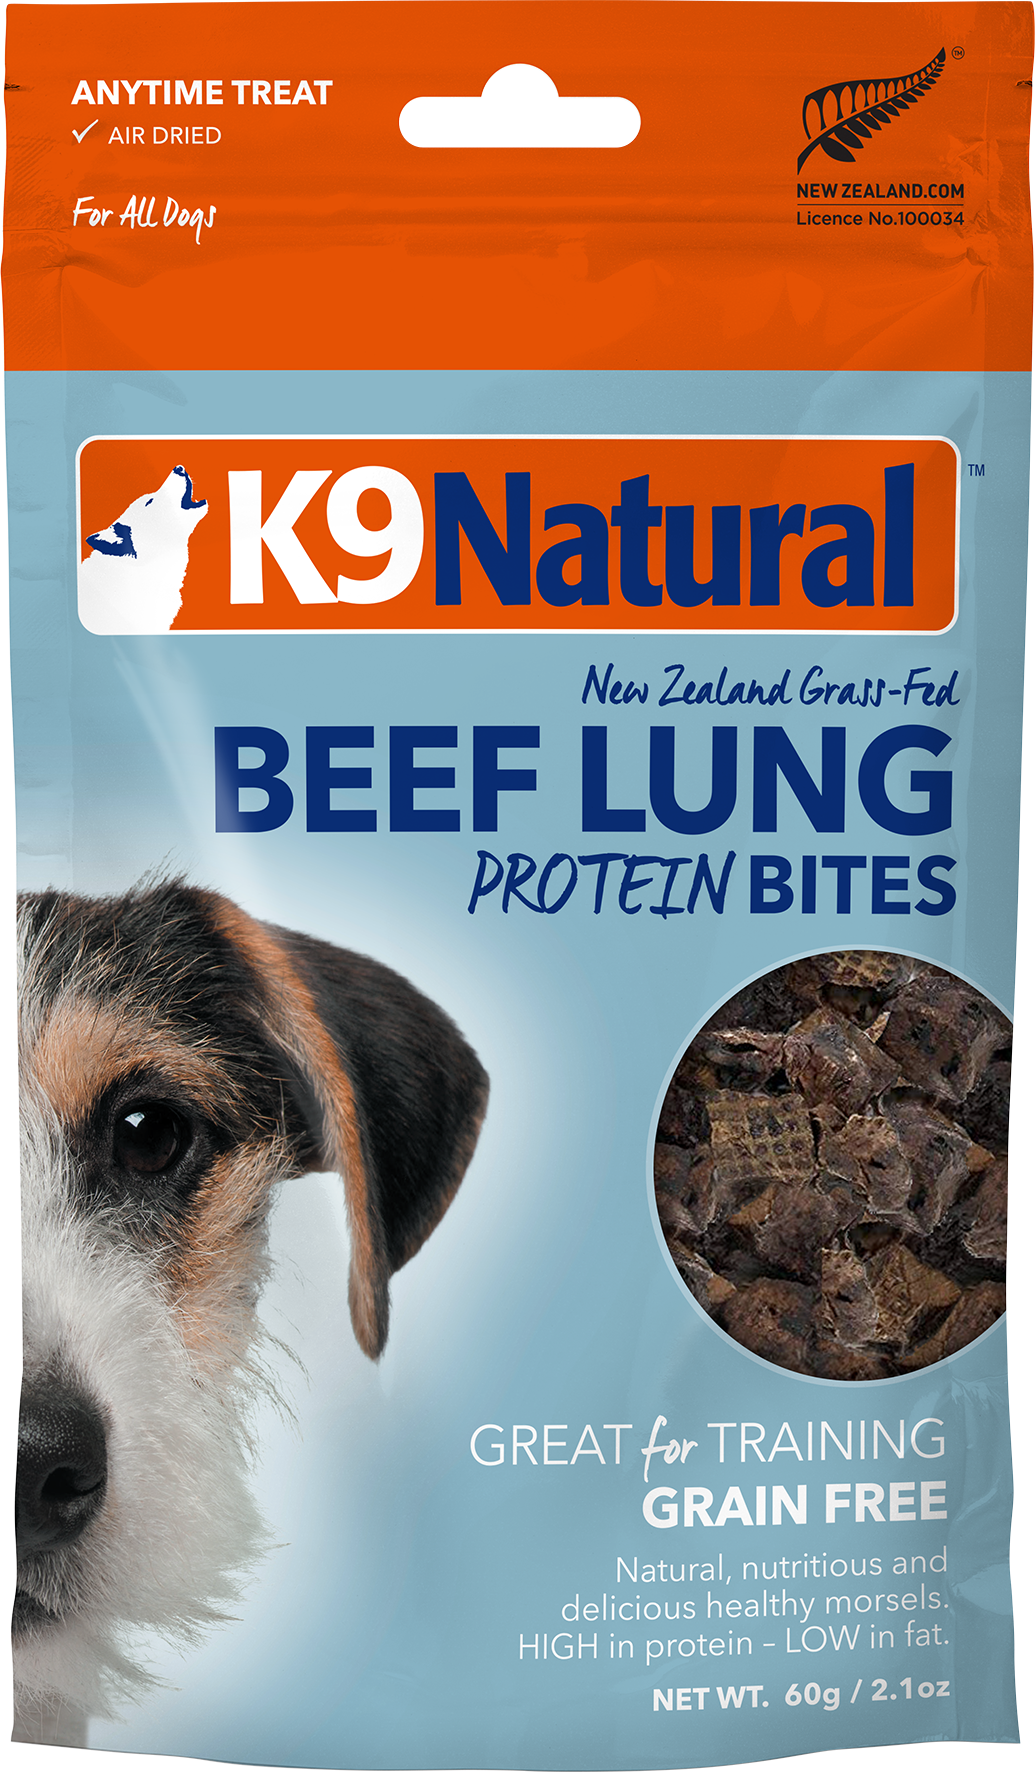 K9 Natural - Beef Lung Protein Bites - 50g